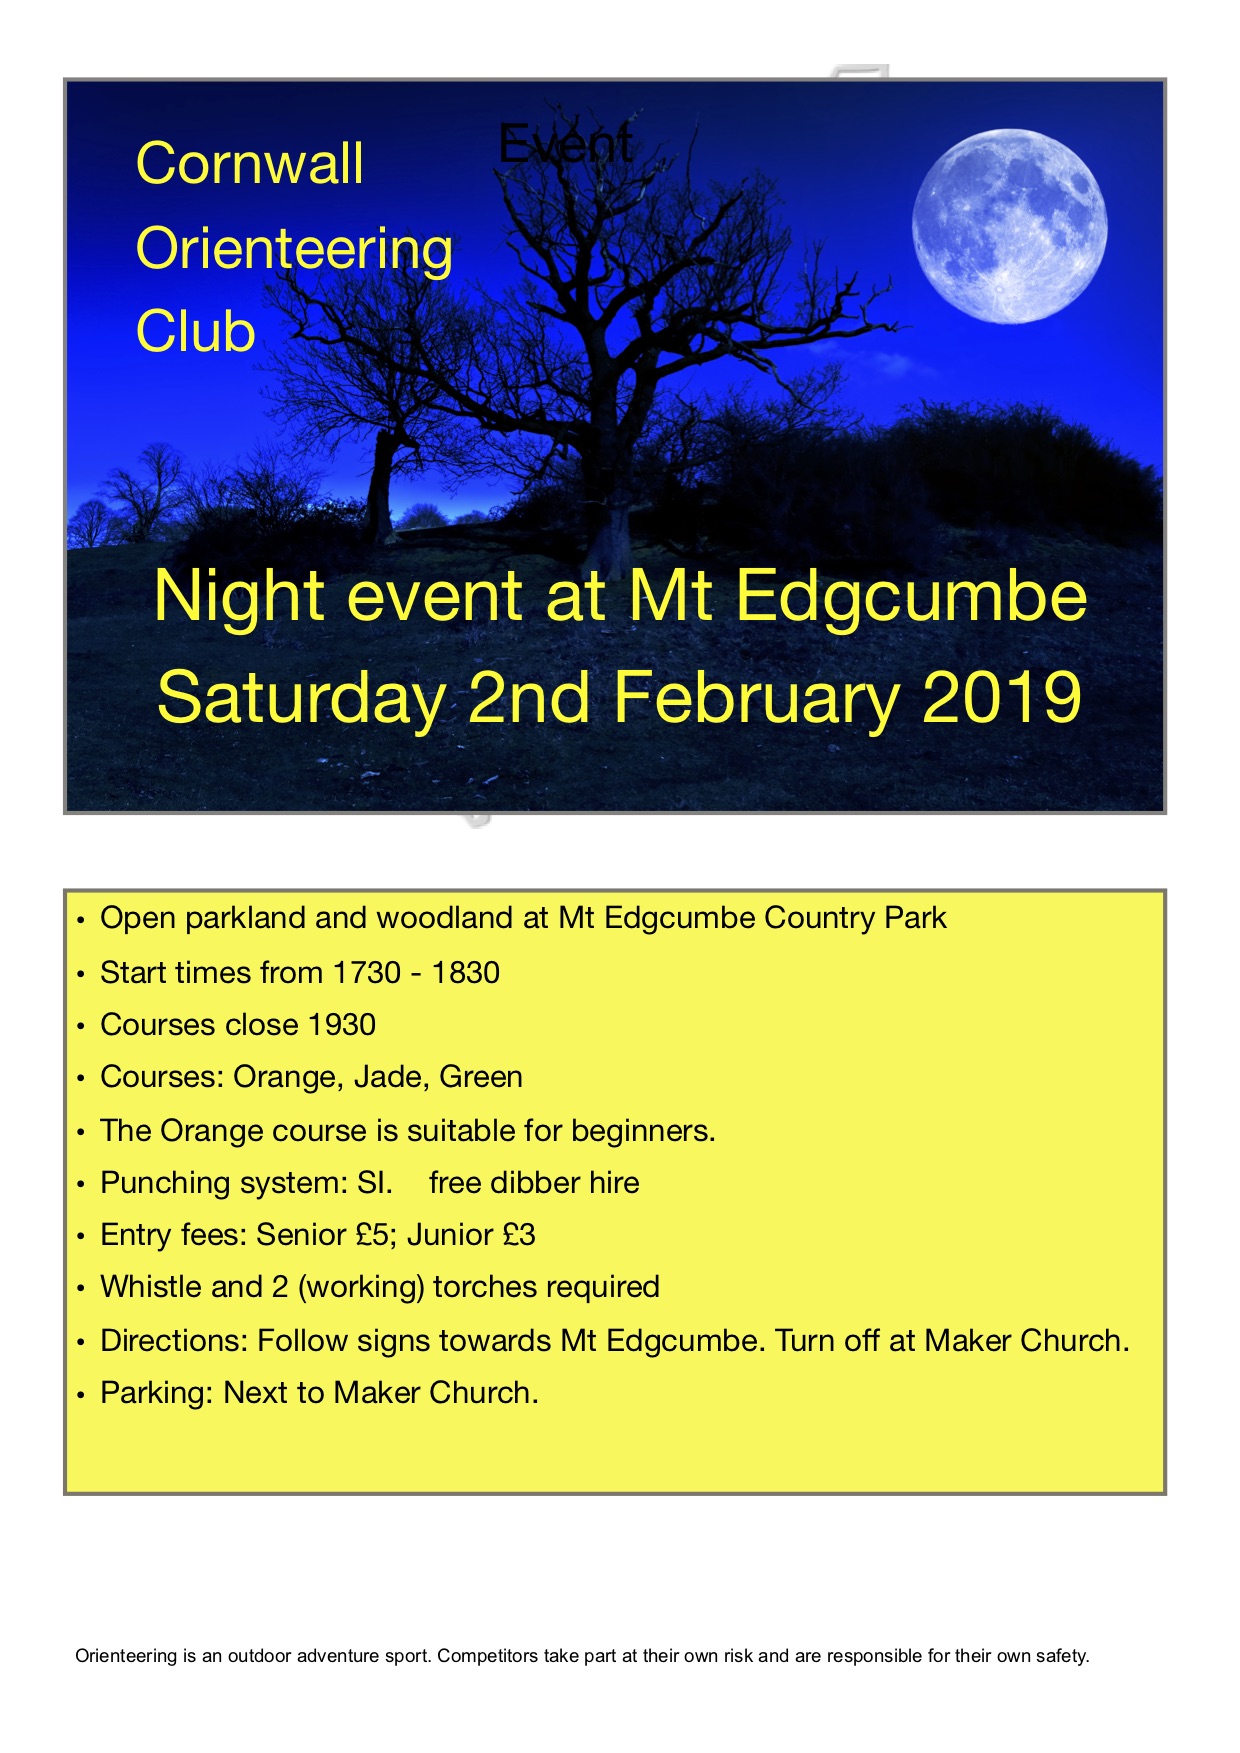 Flyer for Mt Edgcumbe night event